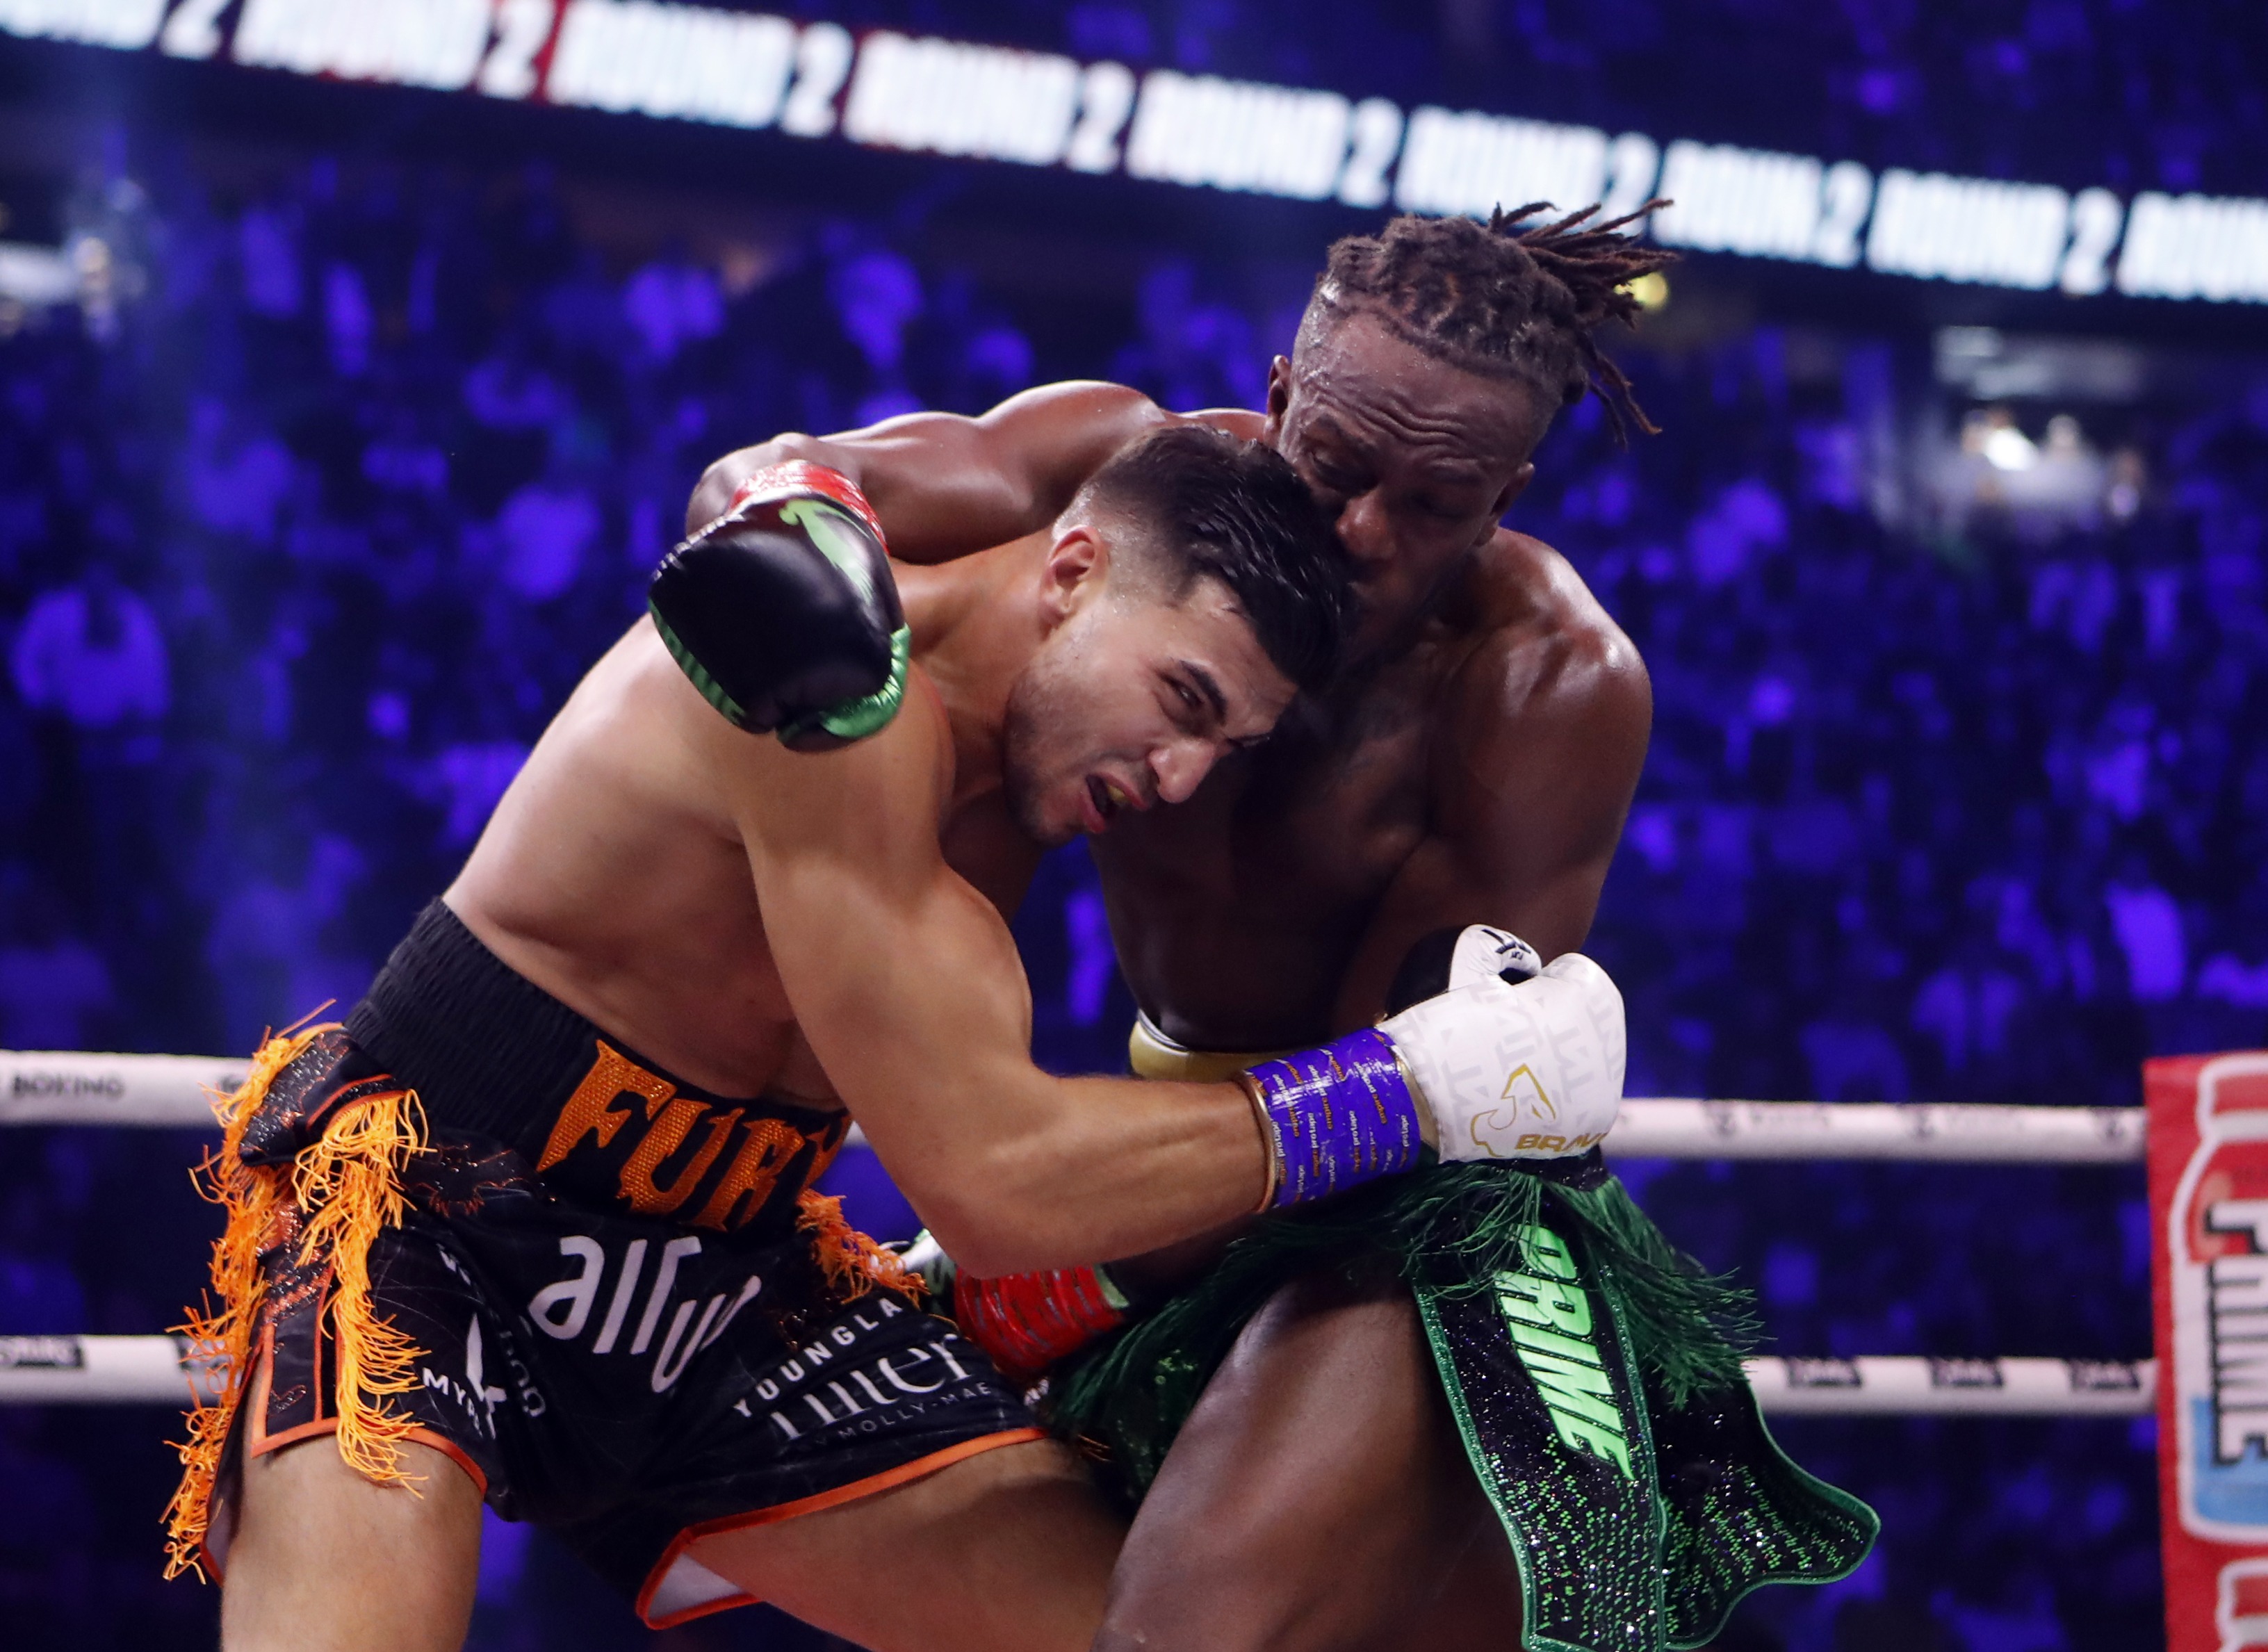 , Tommy Fury Predicts Winner of Jake Paul vs KSI After Fighting Both YouTubers&#8230;And Expects Brutal KO